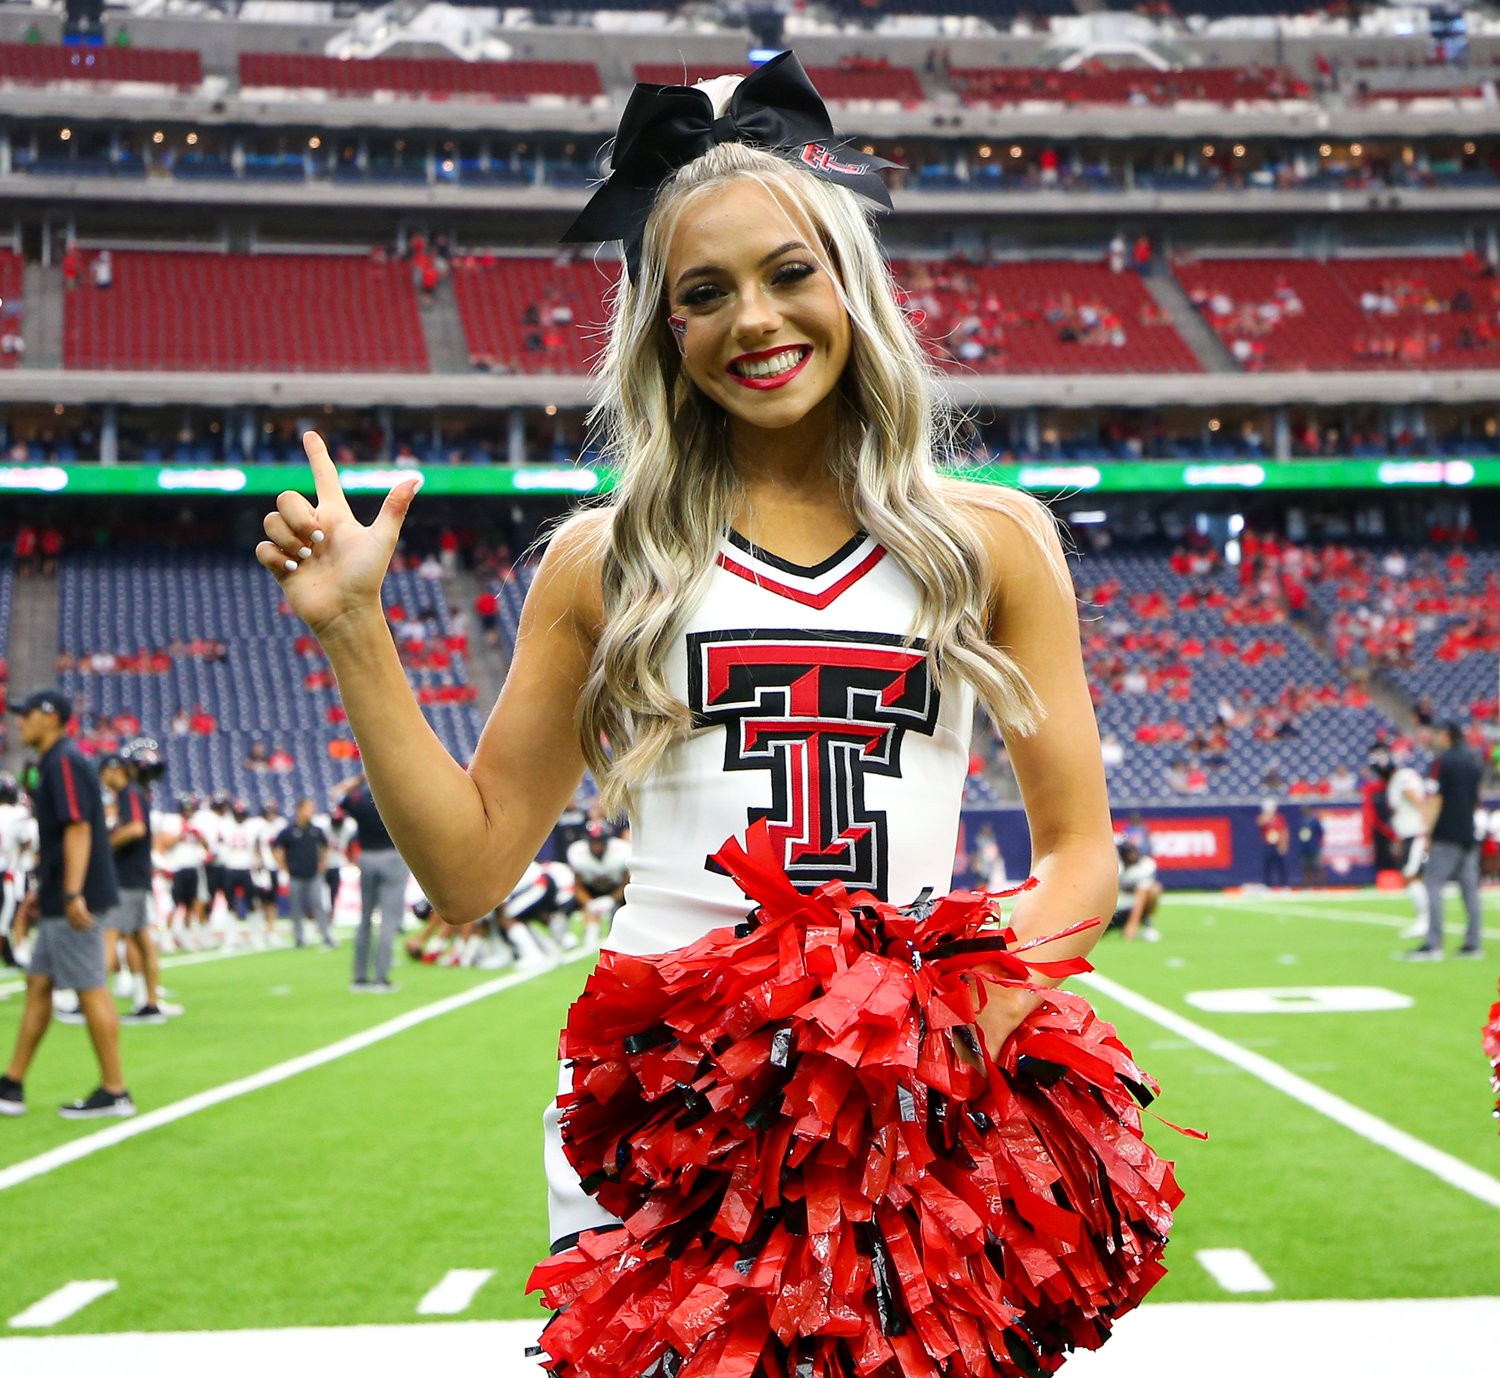 A Texas Tech Red Raiders cheerleader before the start of an NCAA football game between Houston and Texas Tech on September 4, 2021 in Houston, Texas.